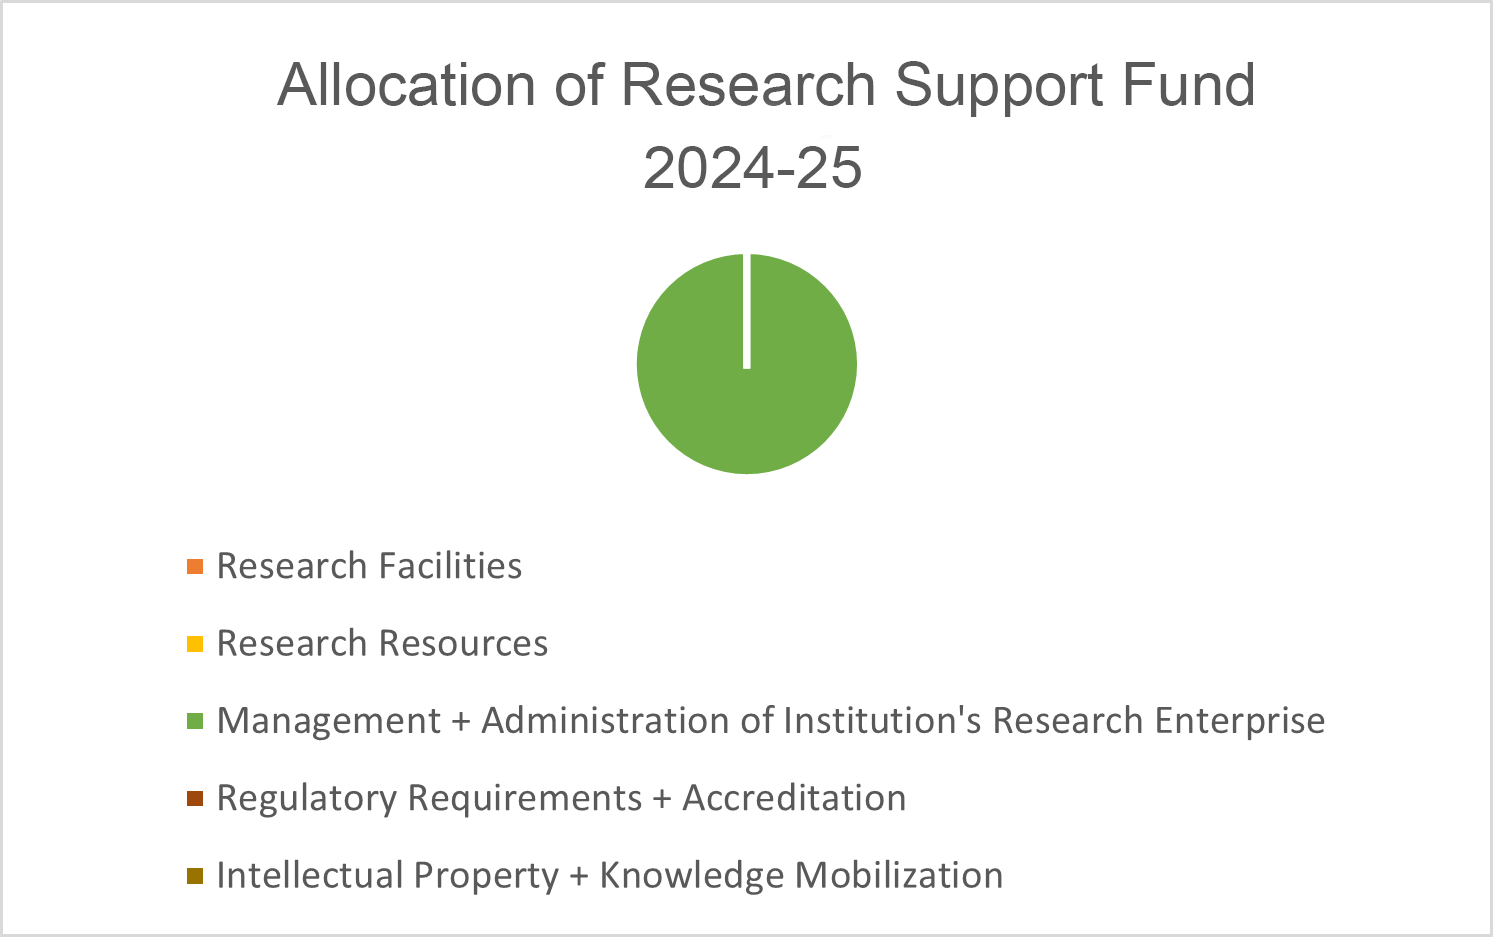 Allocation of Research Support fund 2024-25